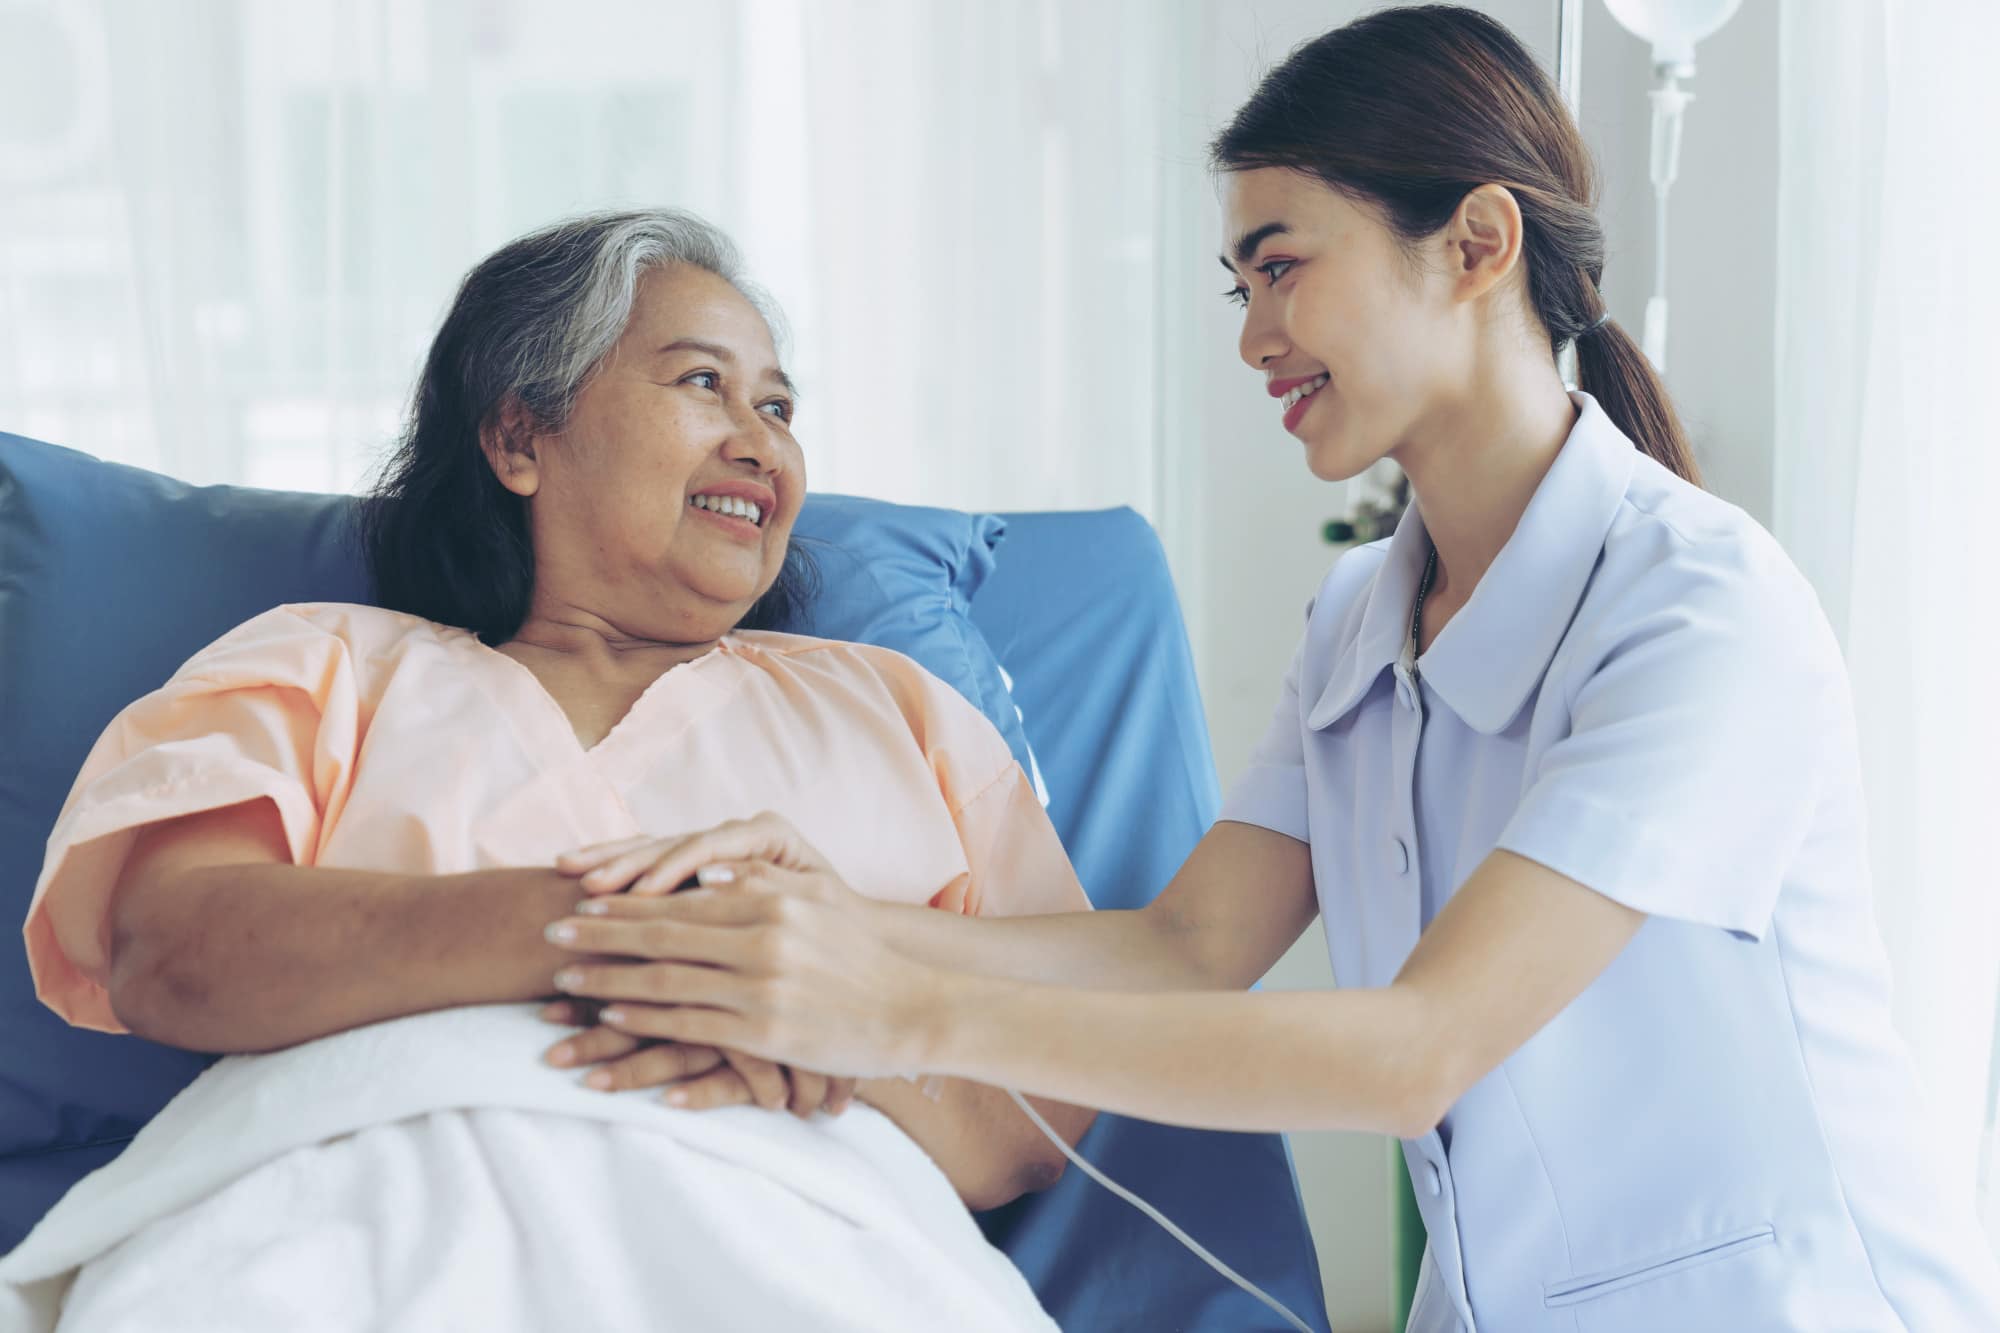 nurses-are-well-good-taken-care-elderly-woman-patients-hospital-bed-patients-feel-happiness-medical-healthcare-concept